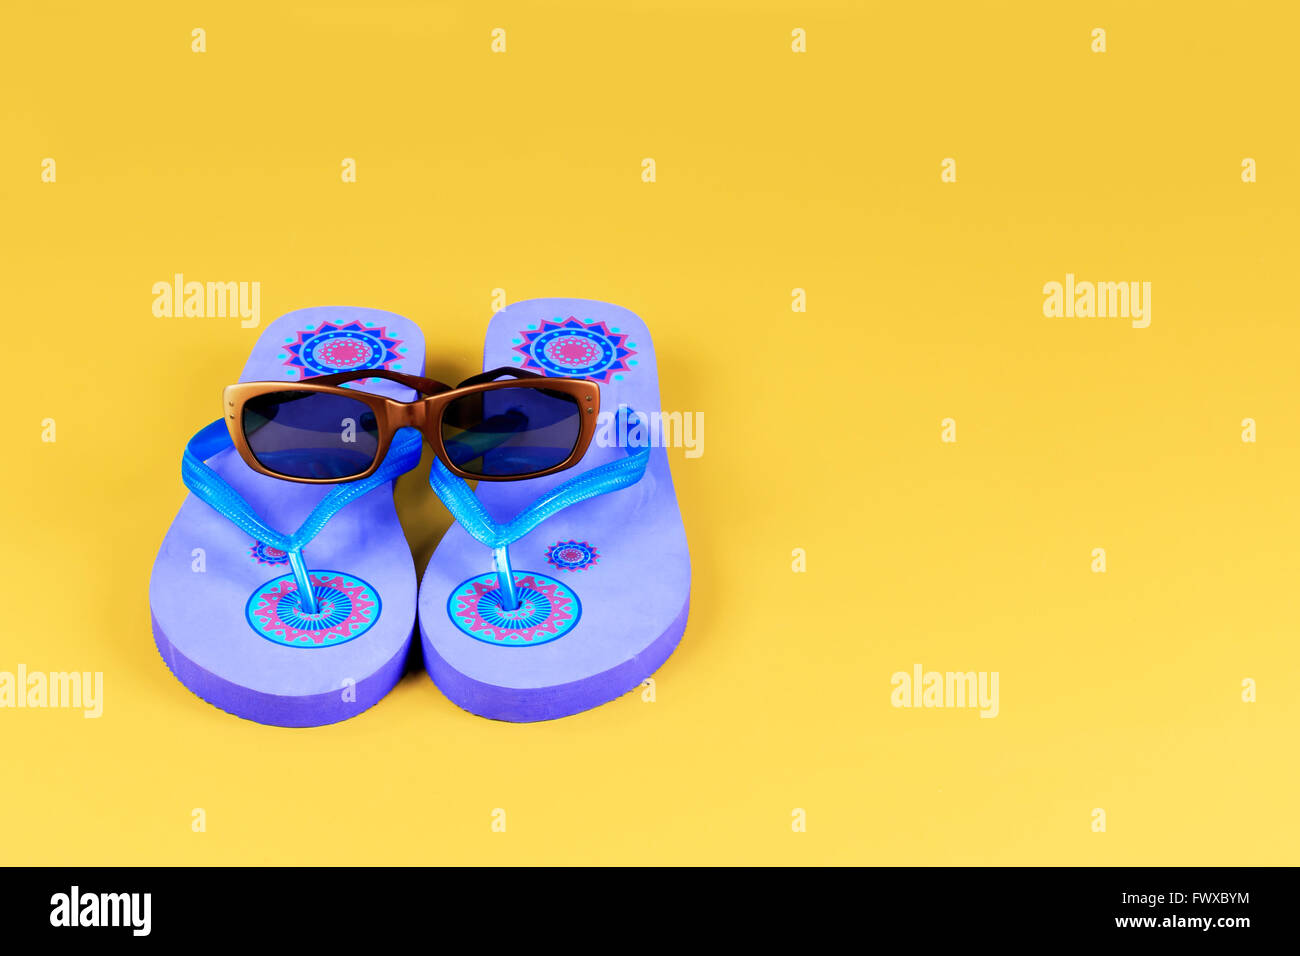 Pair of blue flip-flops and sun glasses on yellow background Stock Photo